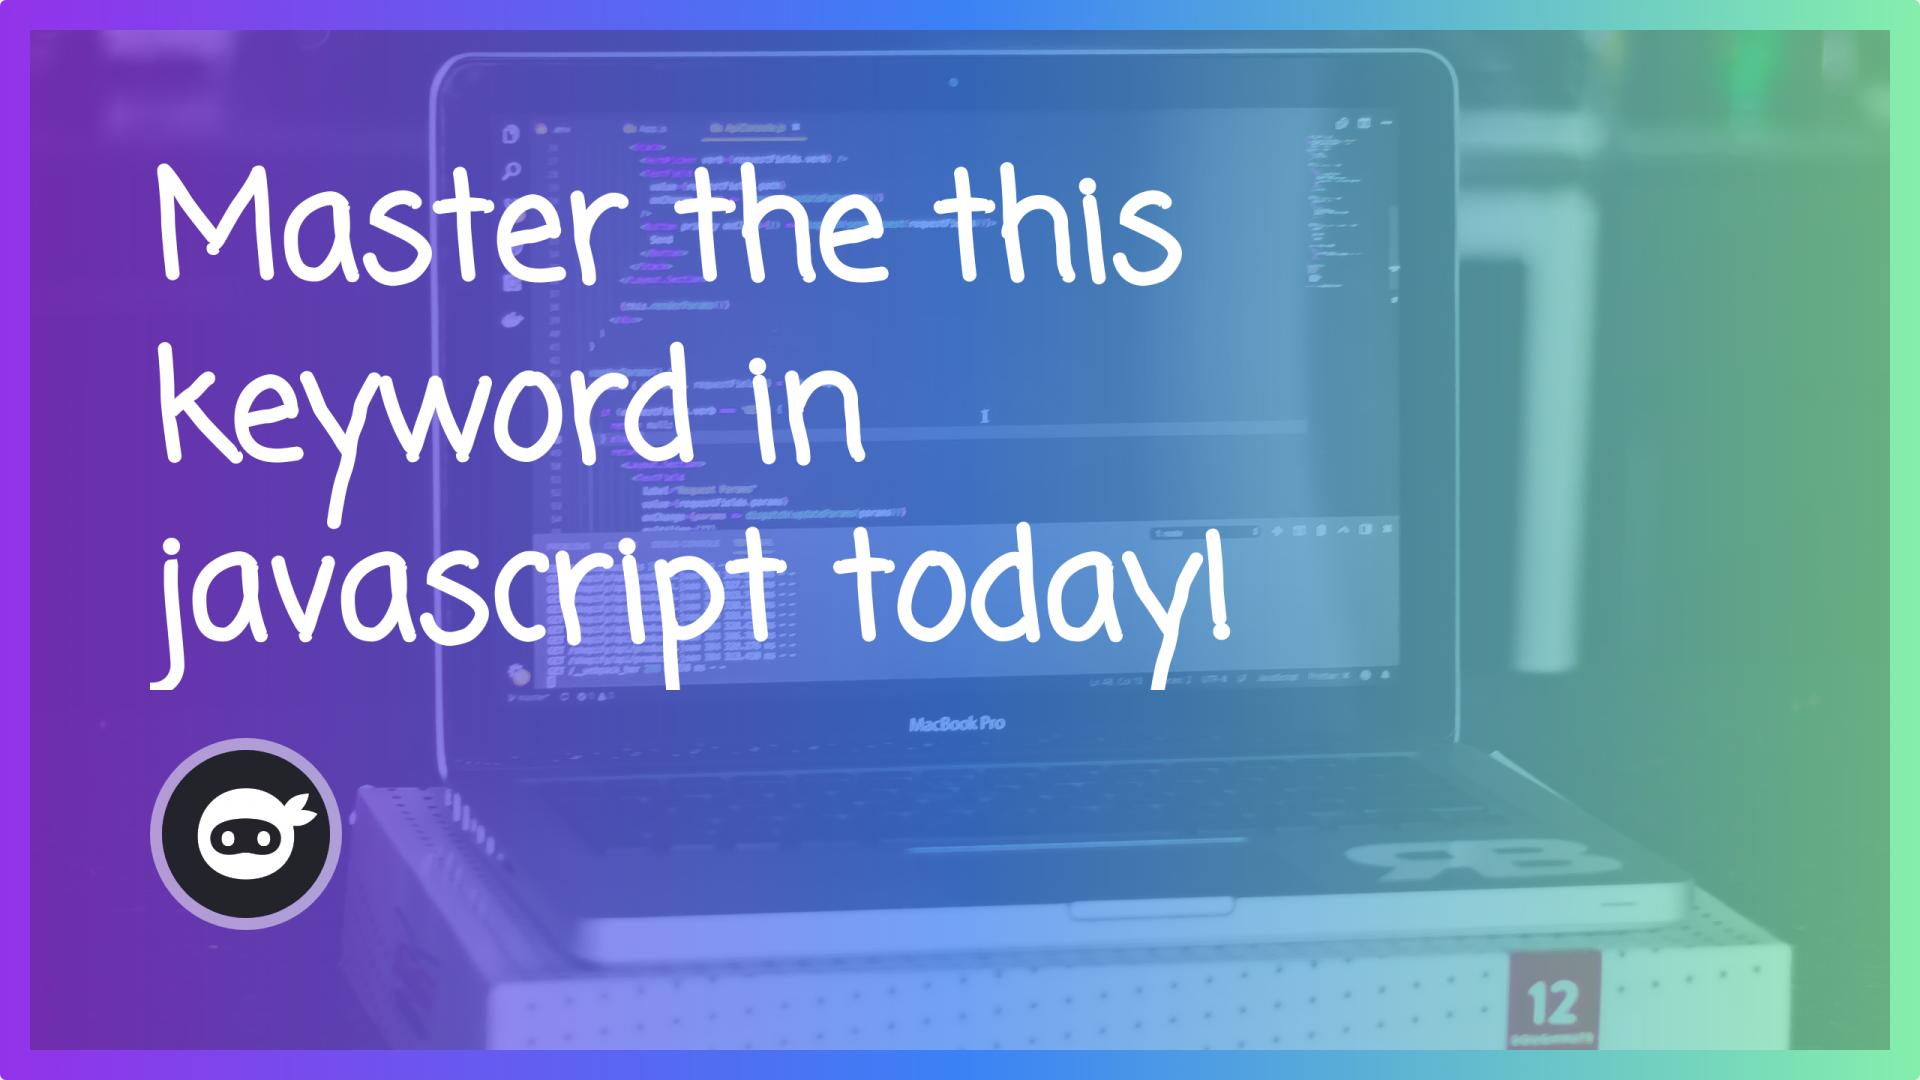 Master the this keyword in javascript today!